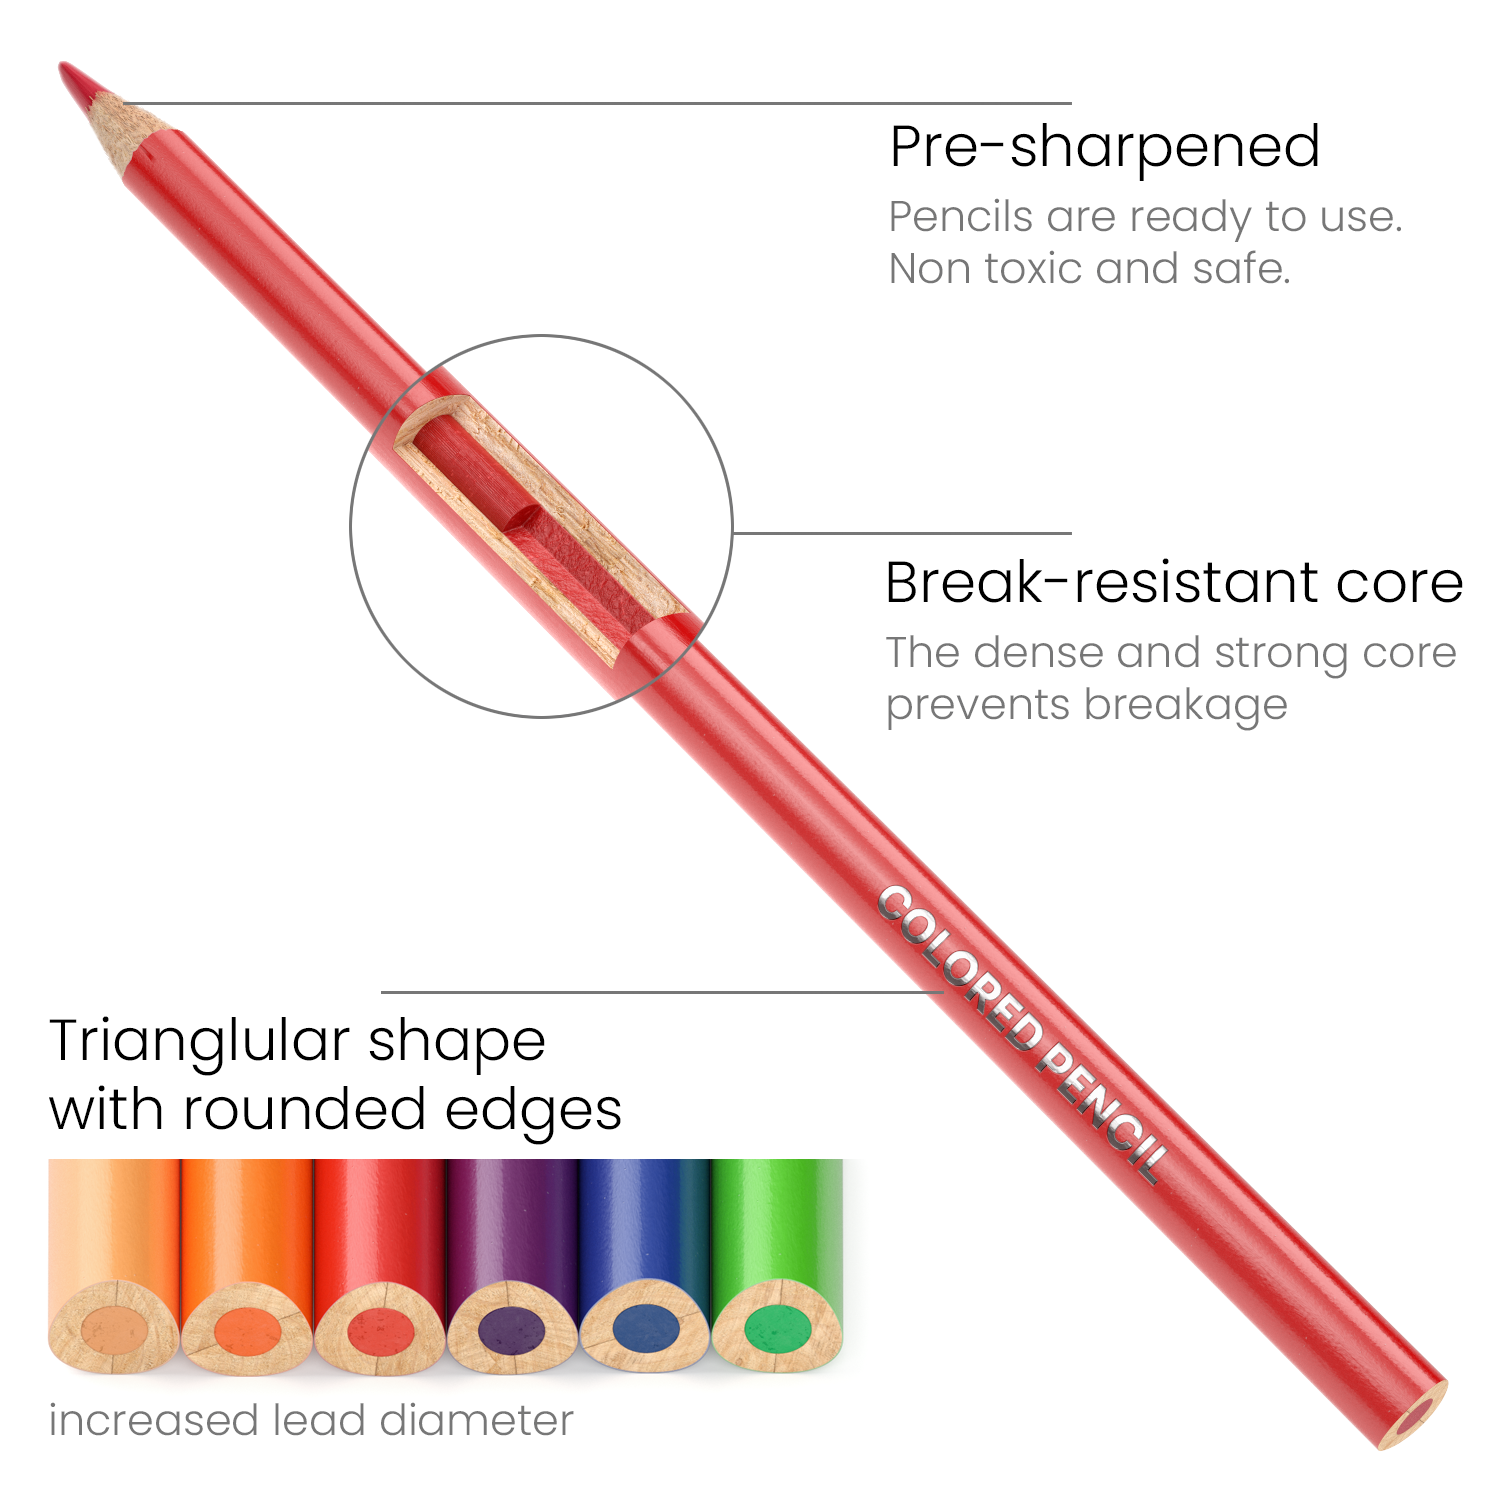 Maped® Color'Peps Triangular Colored Pencils, 2 Packs of 48